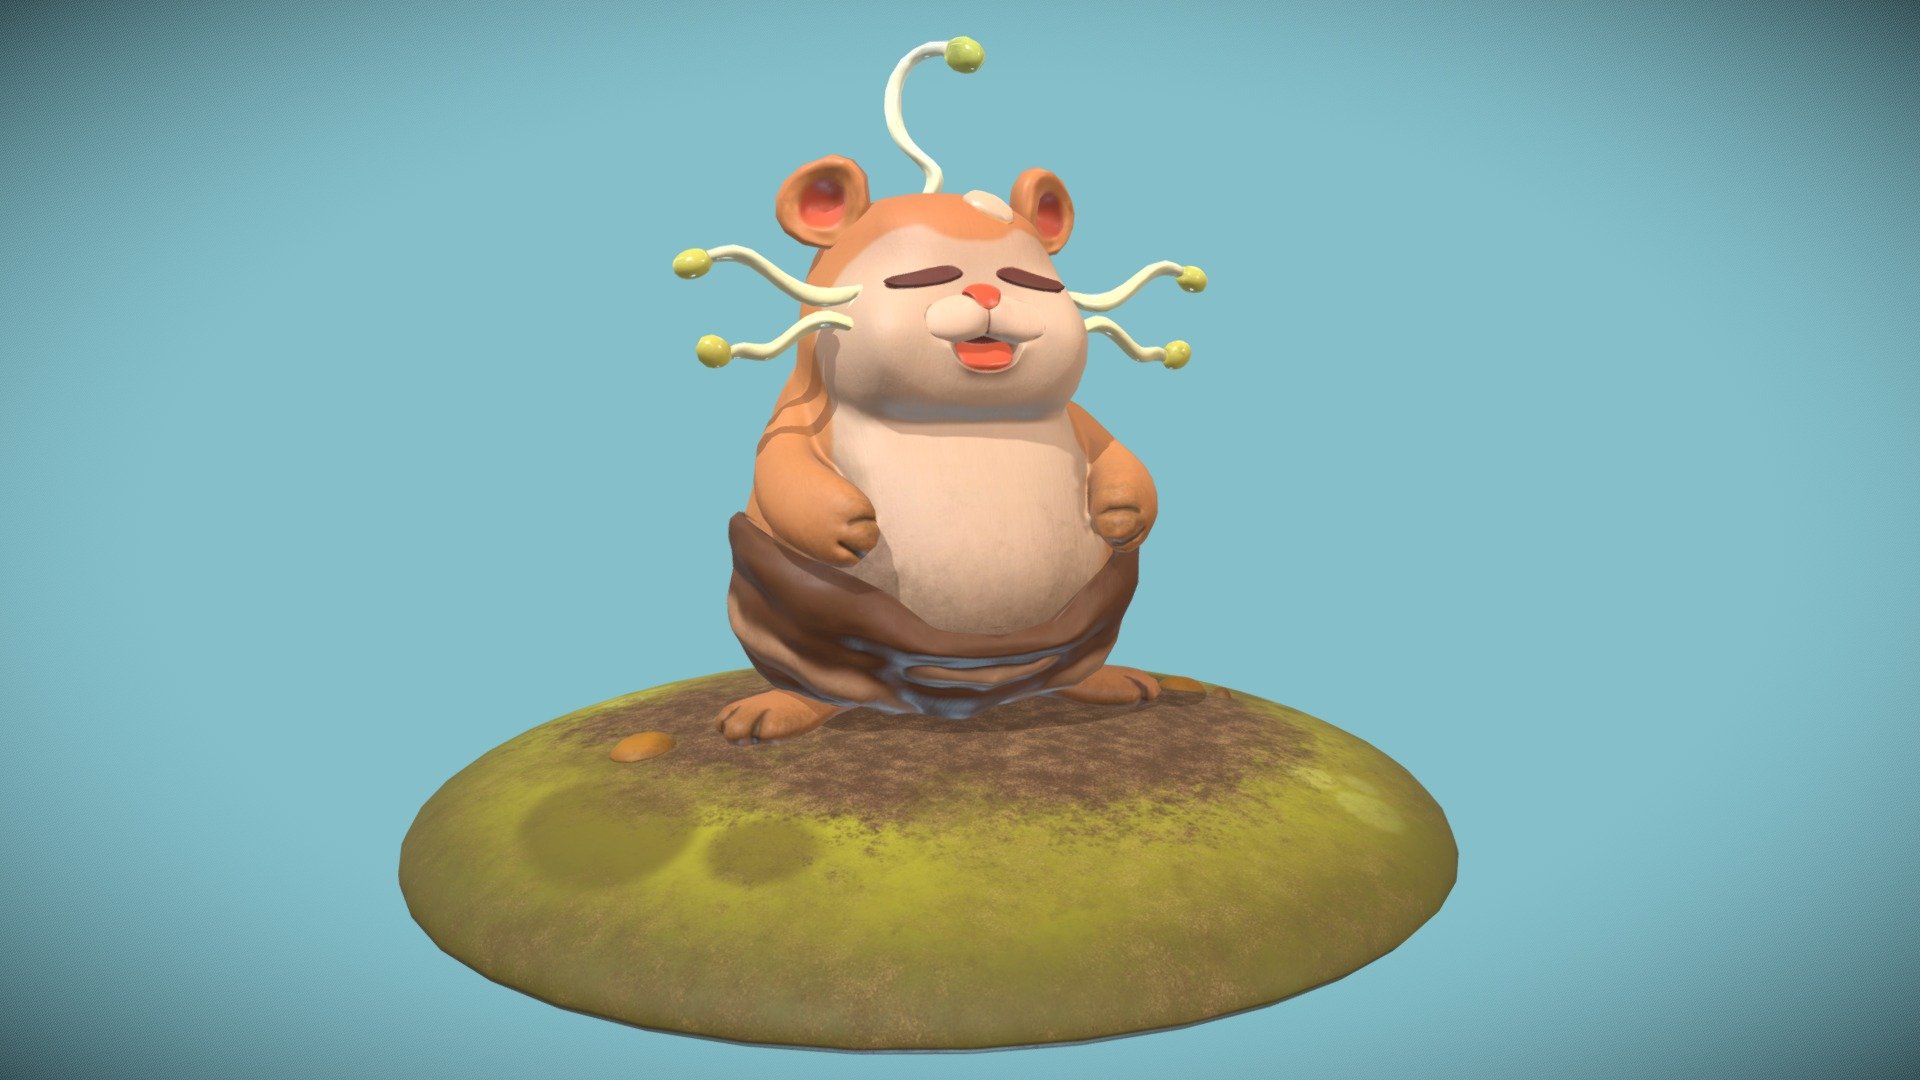 Cute creature workshop for stylized design.

I fell in love with the chubby little bean :)
2D concept art by Omegawatt on twitter 3d model